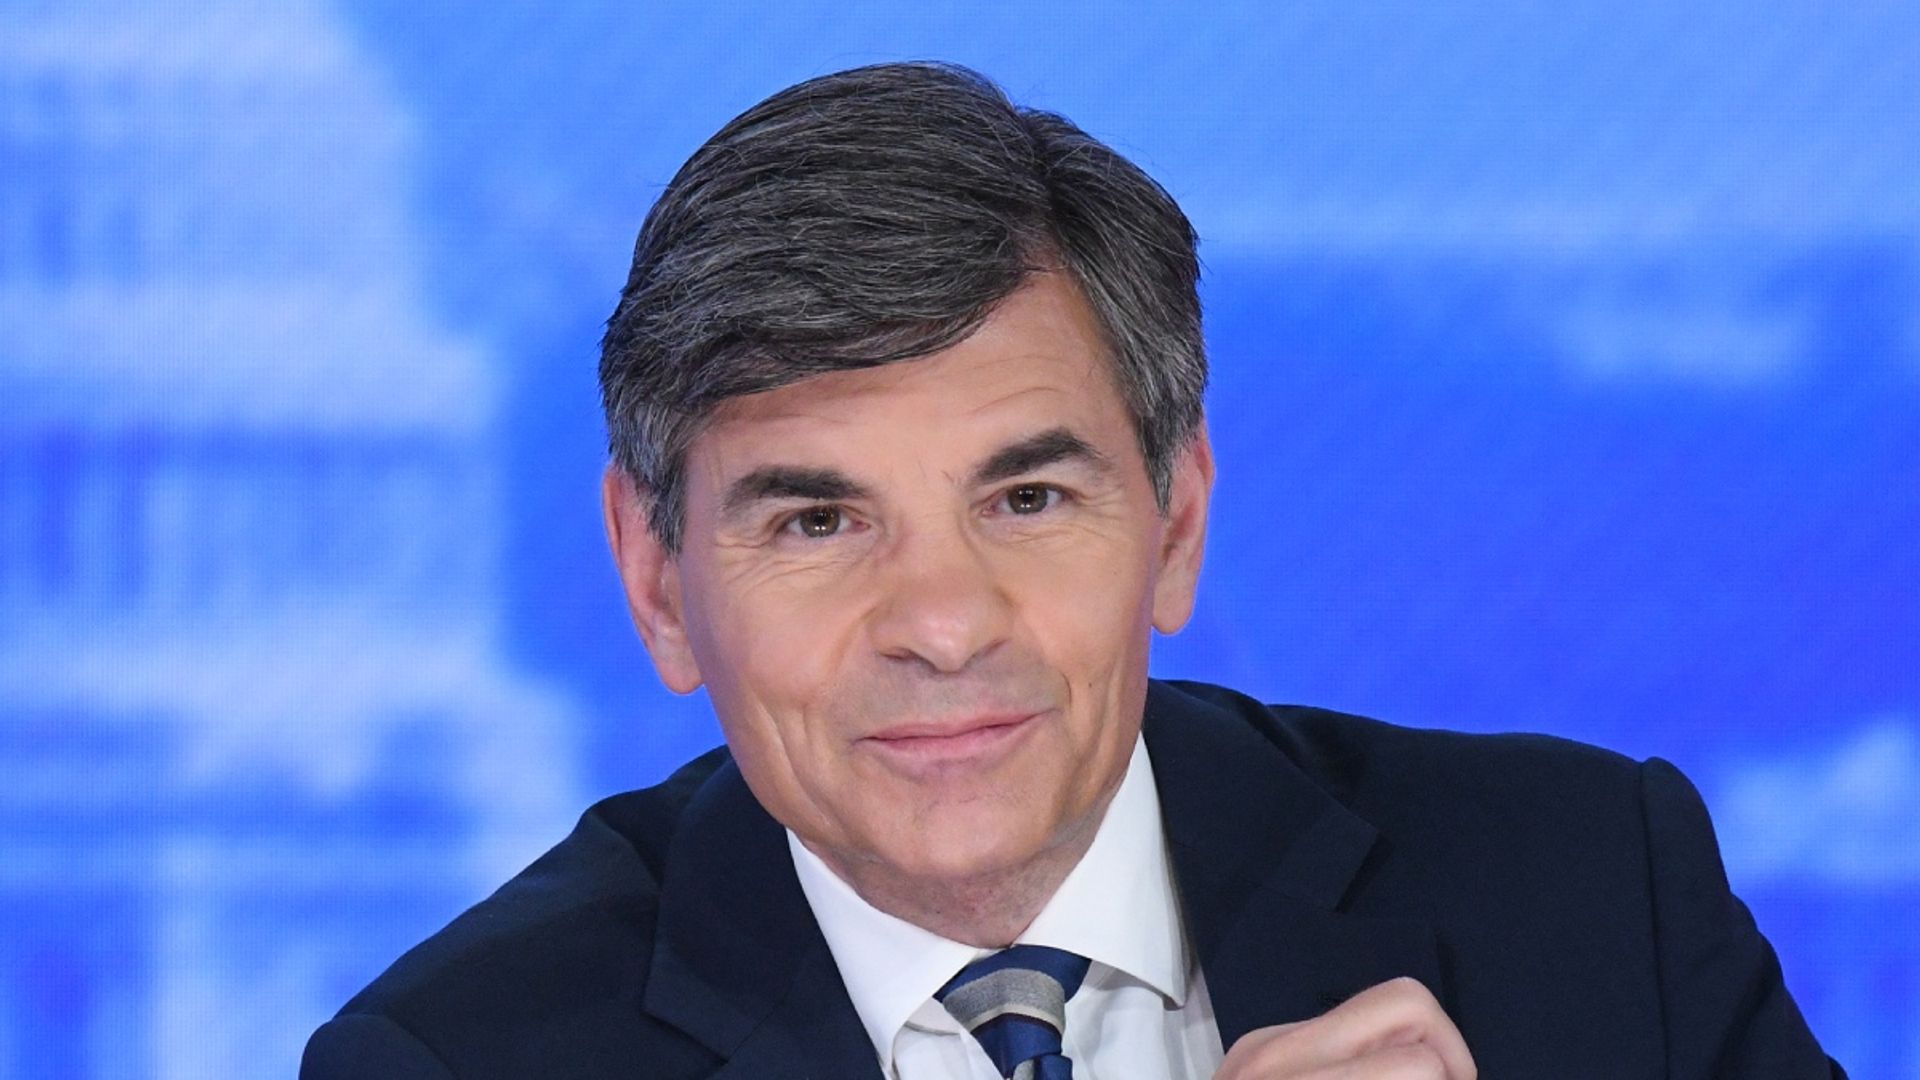 George Stephanopoulos' absence from GMA